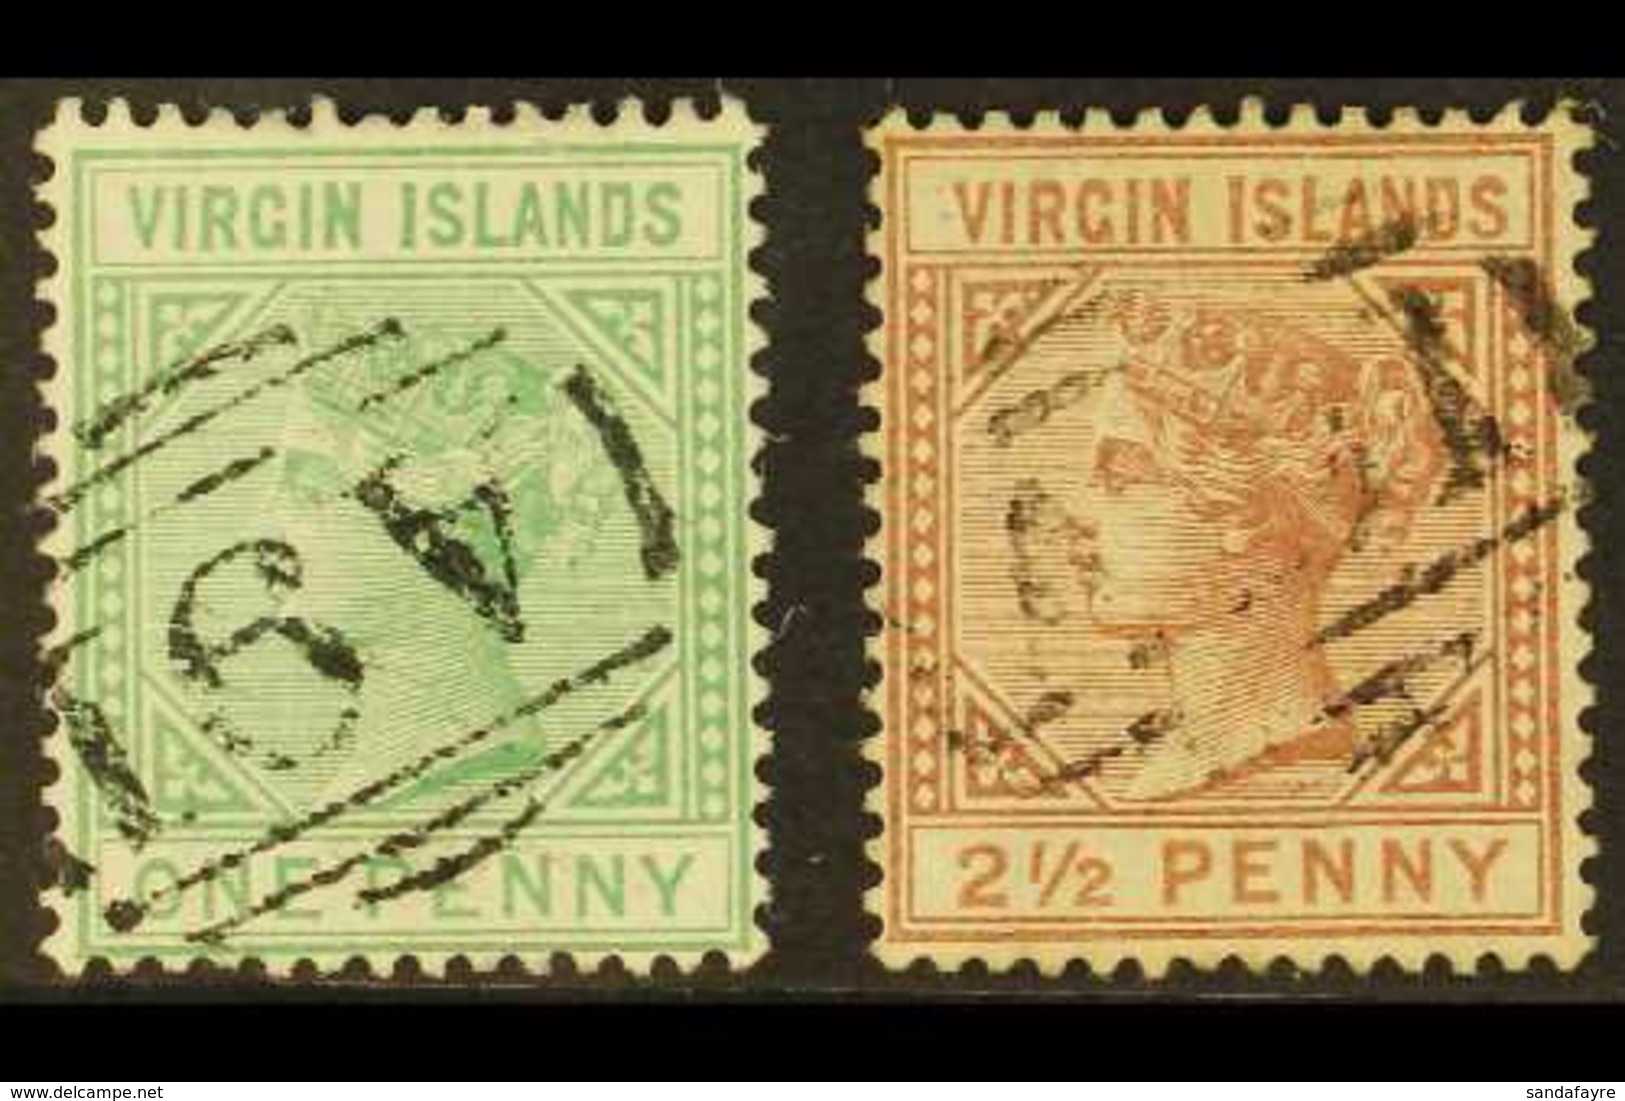 1879-80 1d Emerald-green And 2½d Red-brown, SG 24/25, Each With Neat A91 Cancel. (2 Stamps) For More Images, Please Visi - Iles Vièrges Britanniques